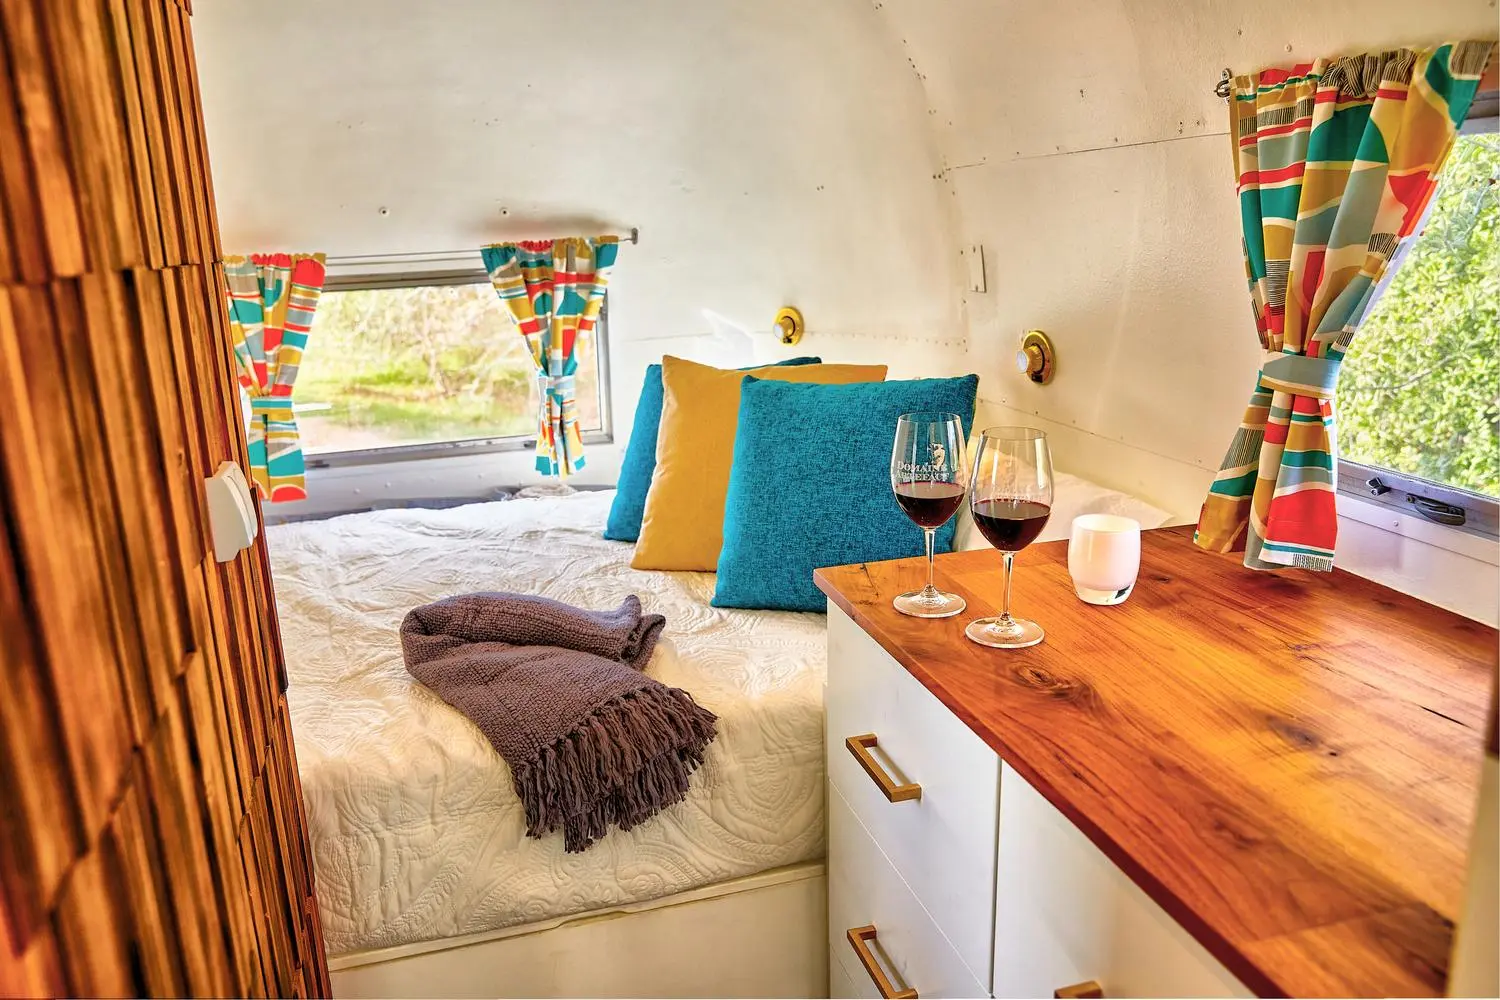 image of airstream bed